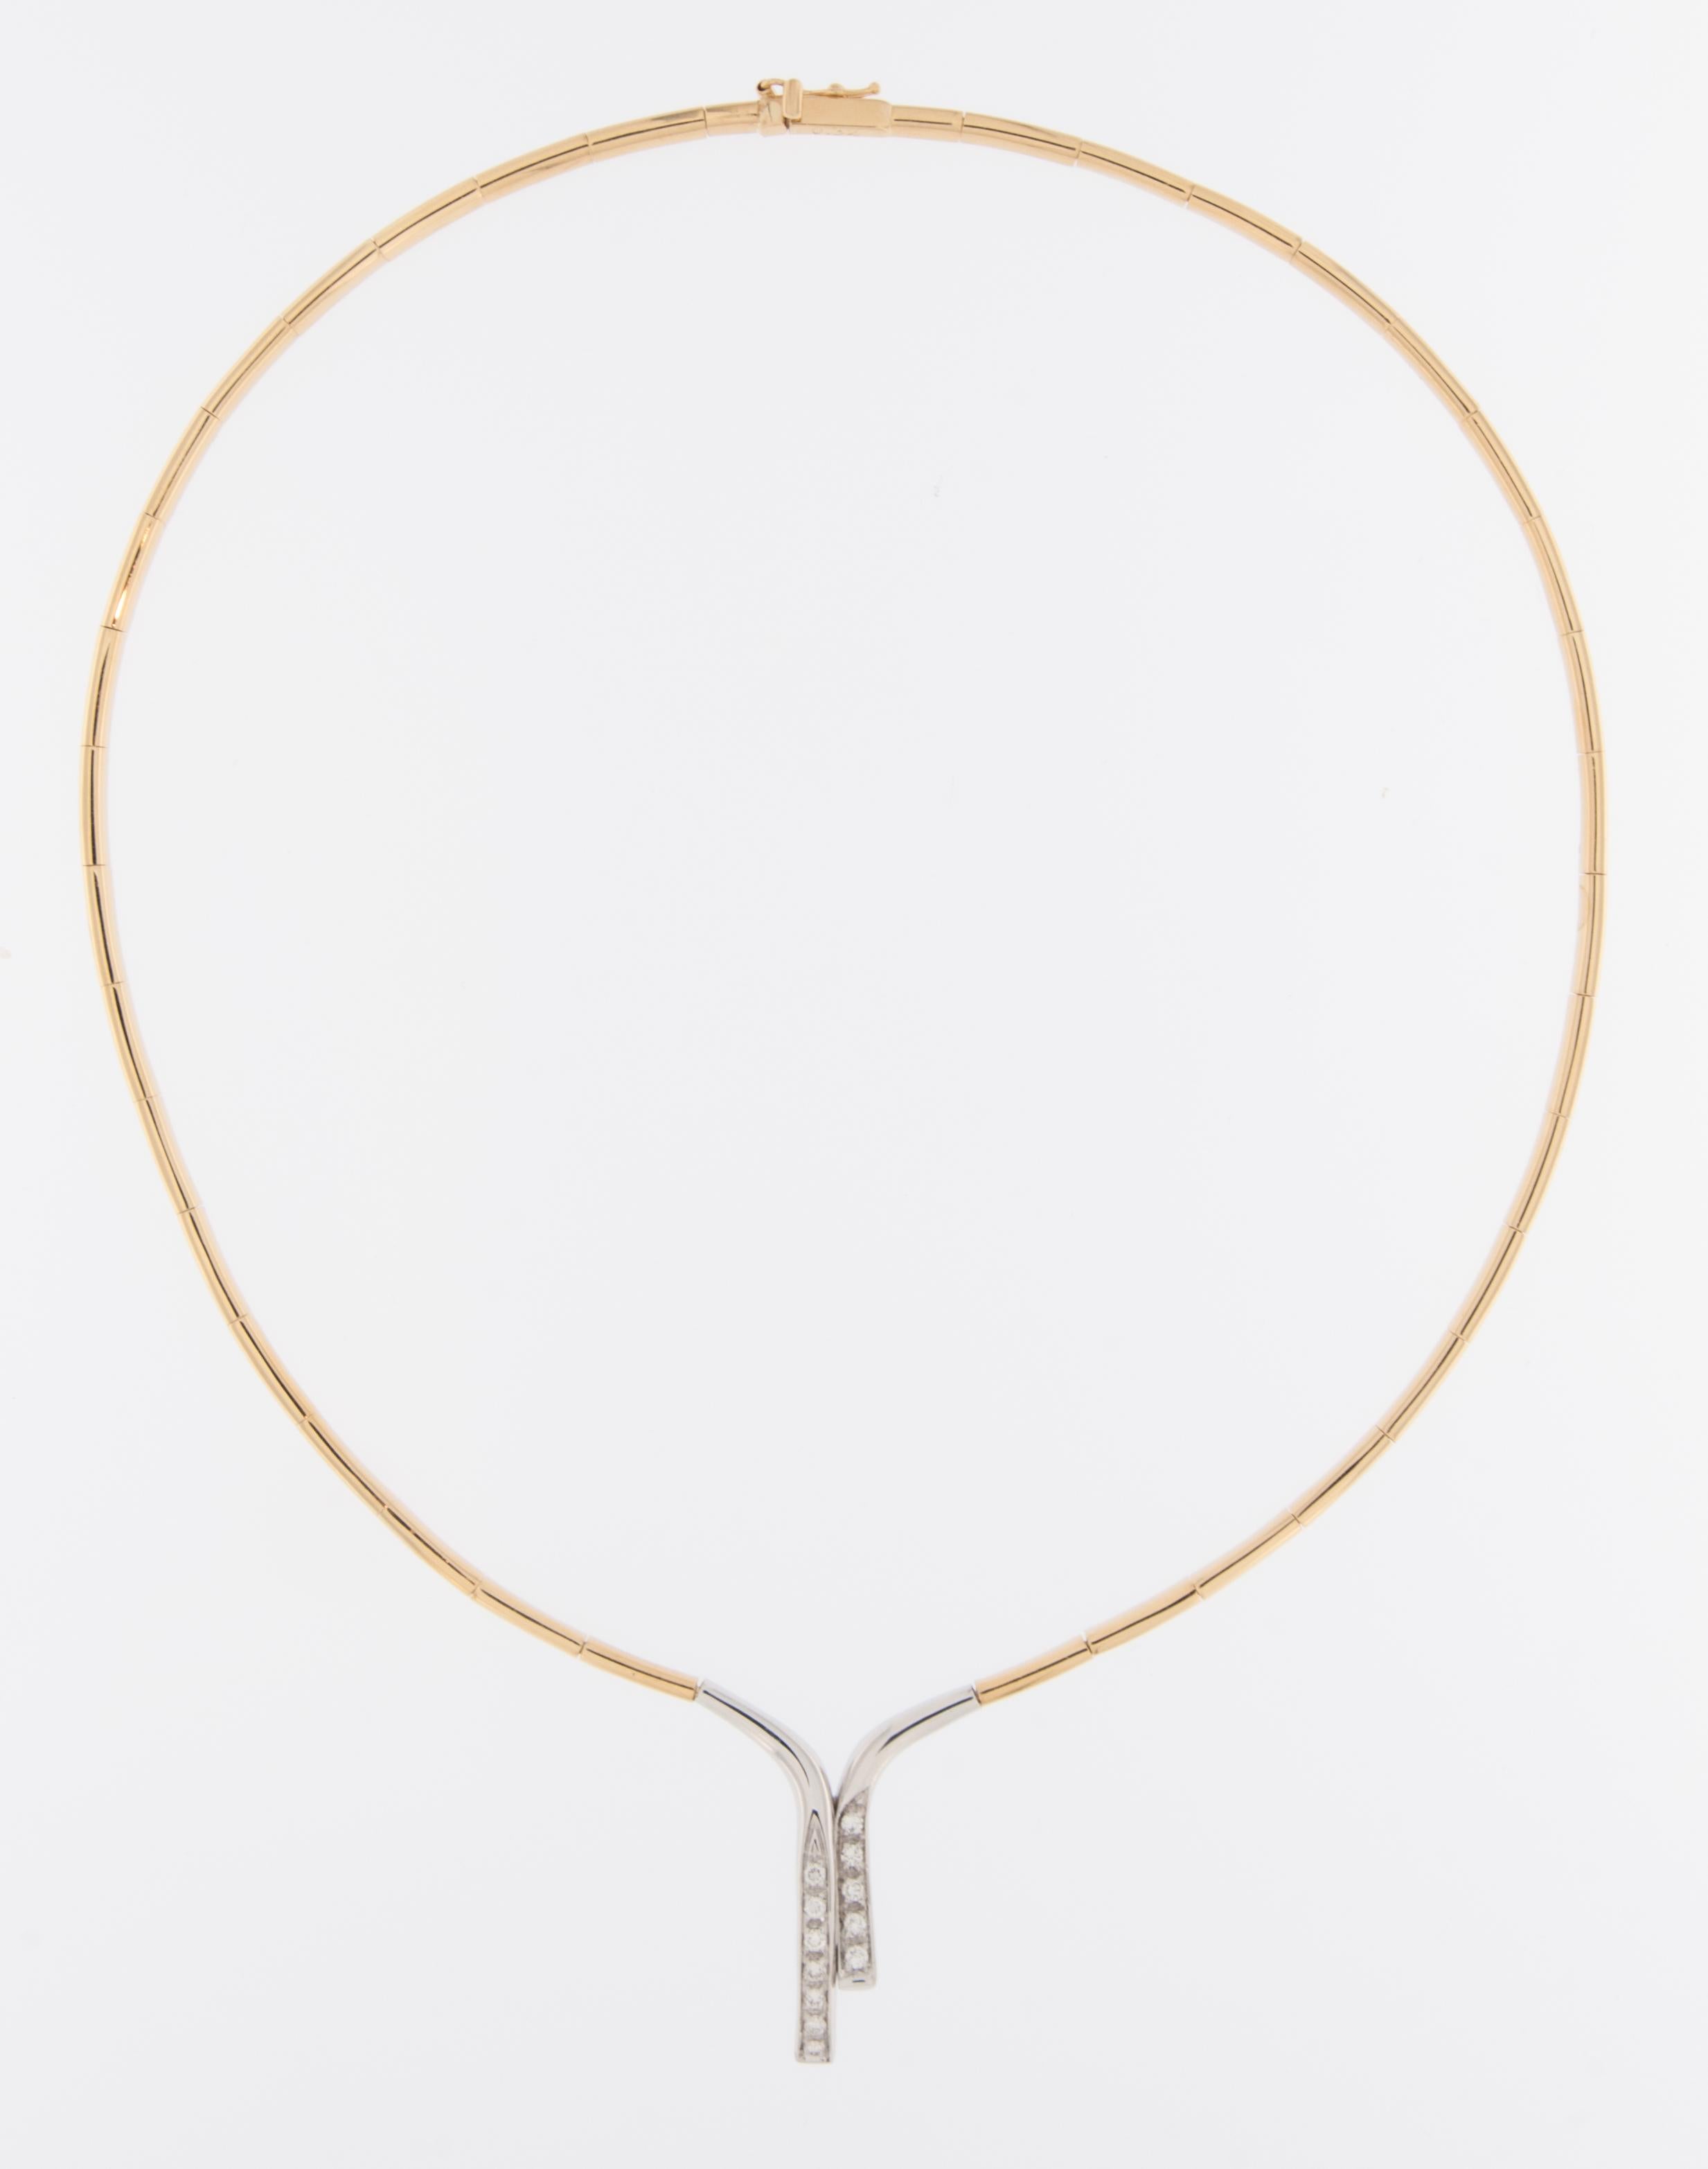 This French 18 karat gold rigid necklace is a testament to French craftsmanship and sophistication, blending the richness of yellow gold with the contemporary allure of white gold. Meticulously crafted, this necklace is an exquisite piece of jewelry